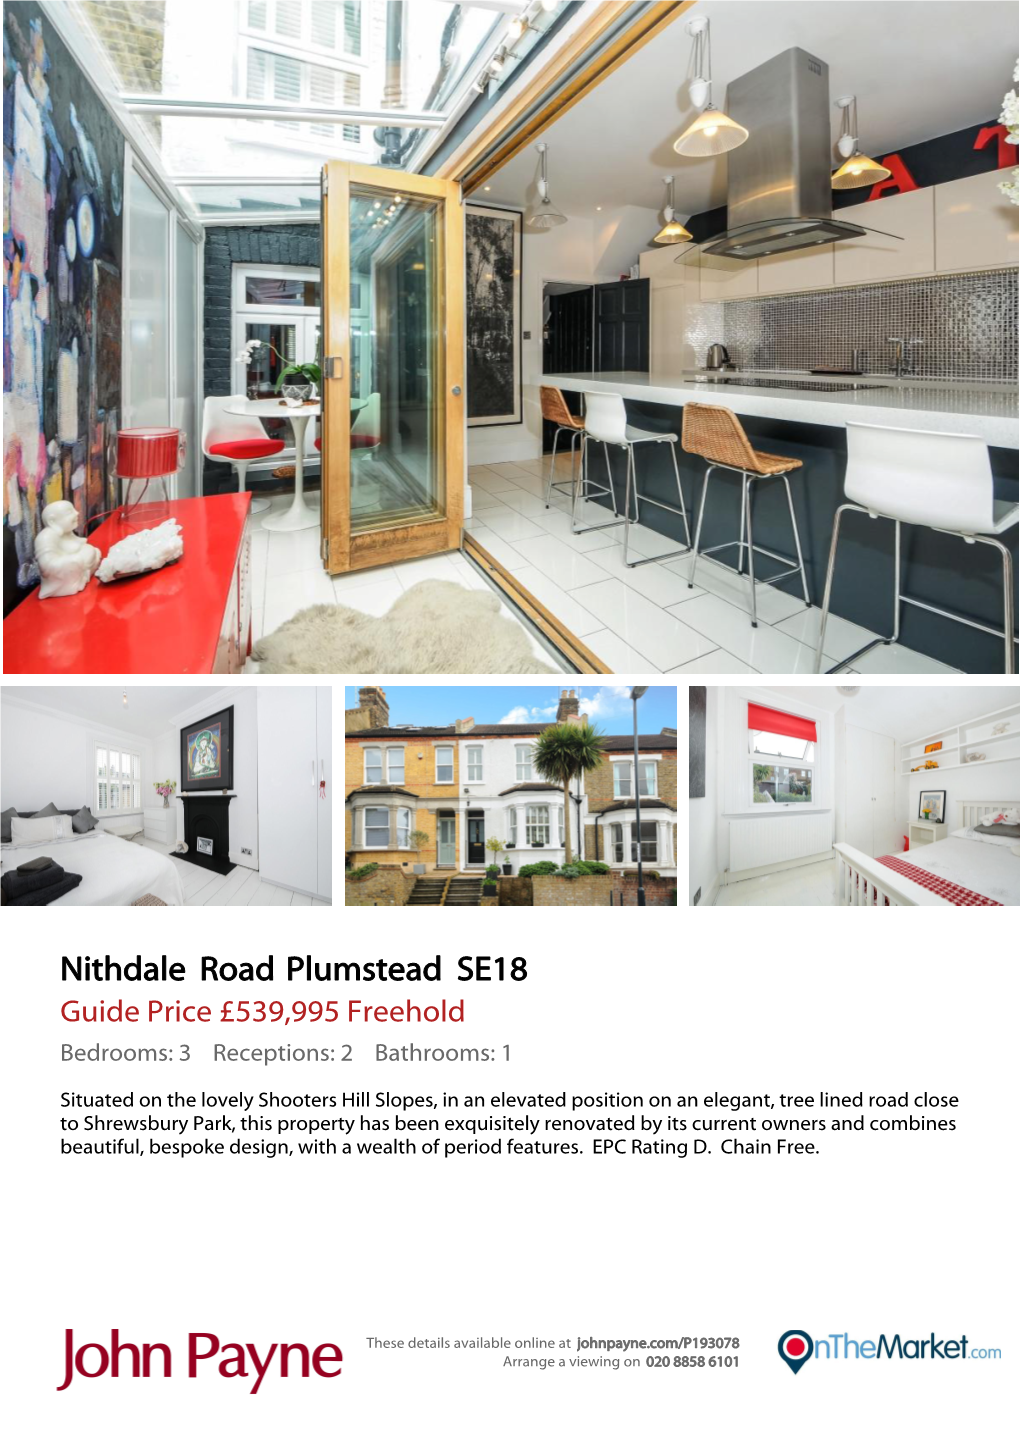 Nithdale Road Plumstead SE18 Guide Price £539,995 Freehold Bedrooms: 3 Receptions: 2 Bathrooms: 1